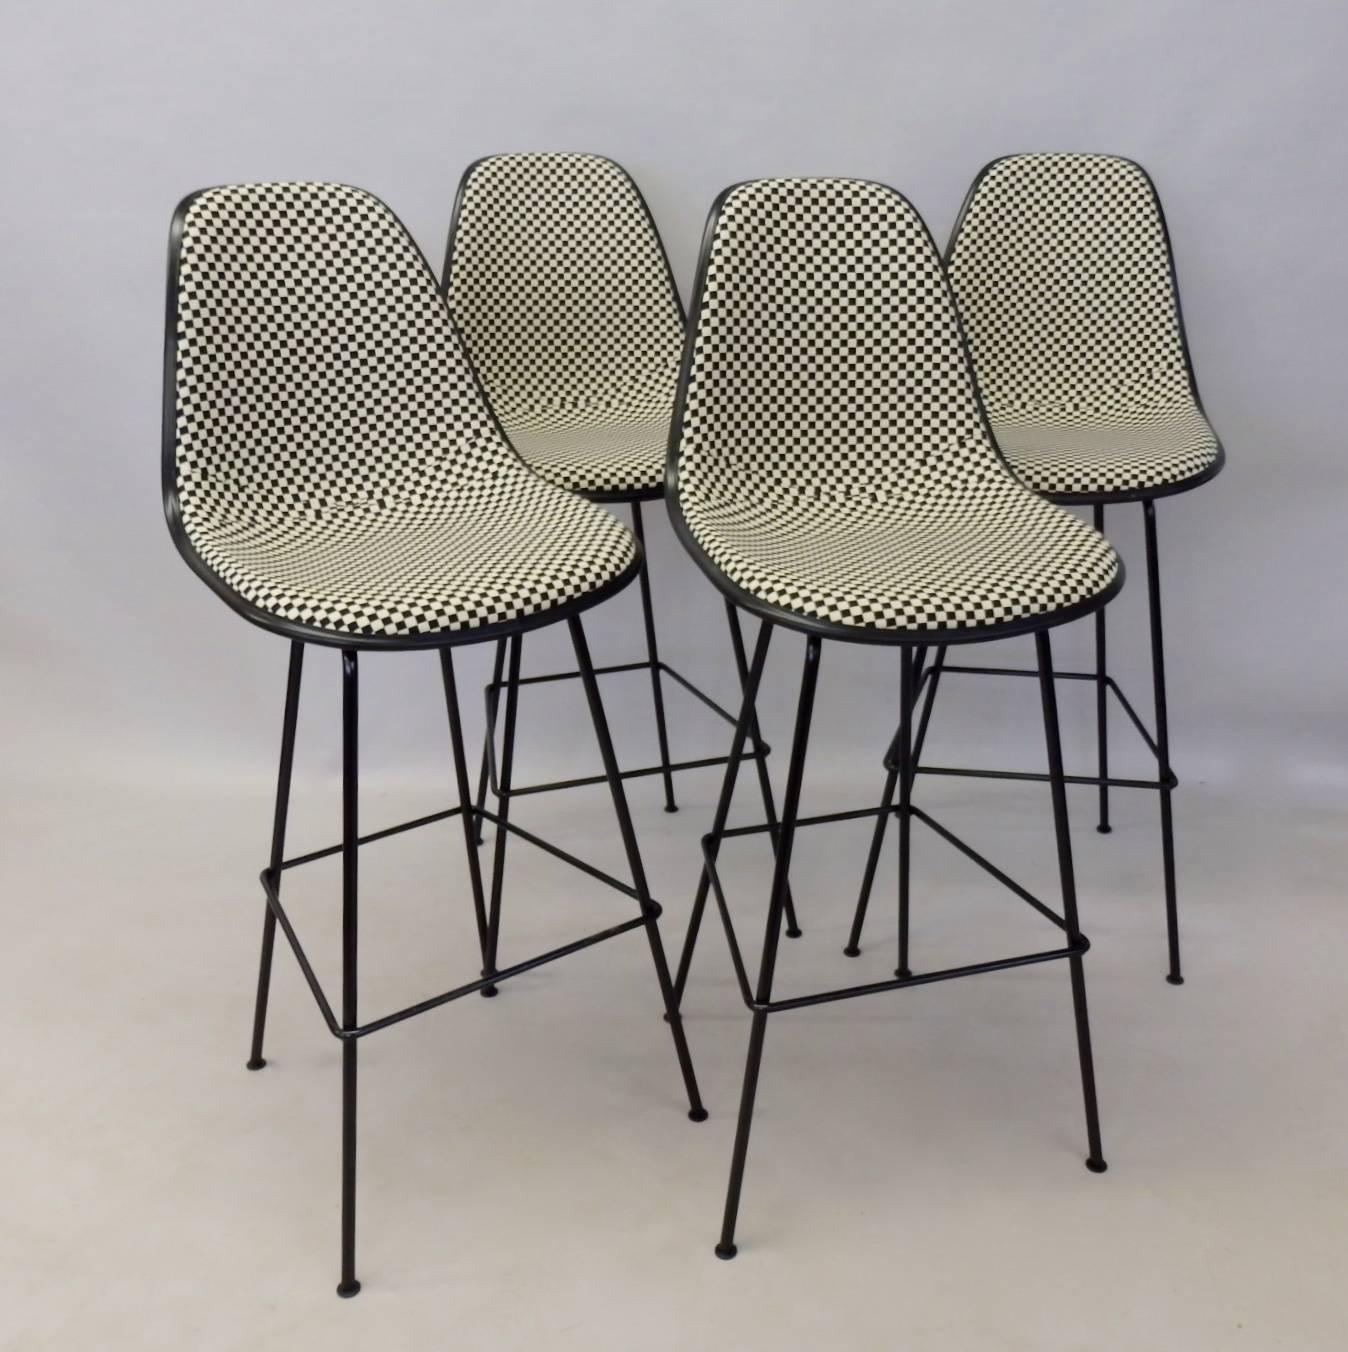 Mid-Century Modern Four Eames Herman Miller Bar Stools with Girard black white Checkerboard Fabric